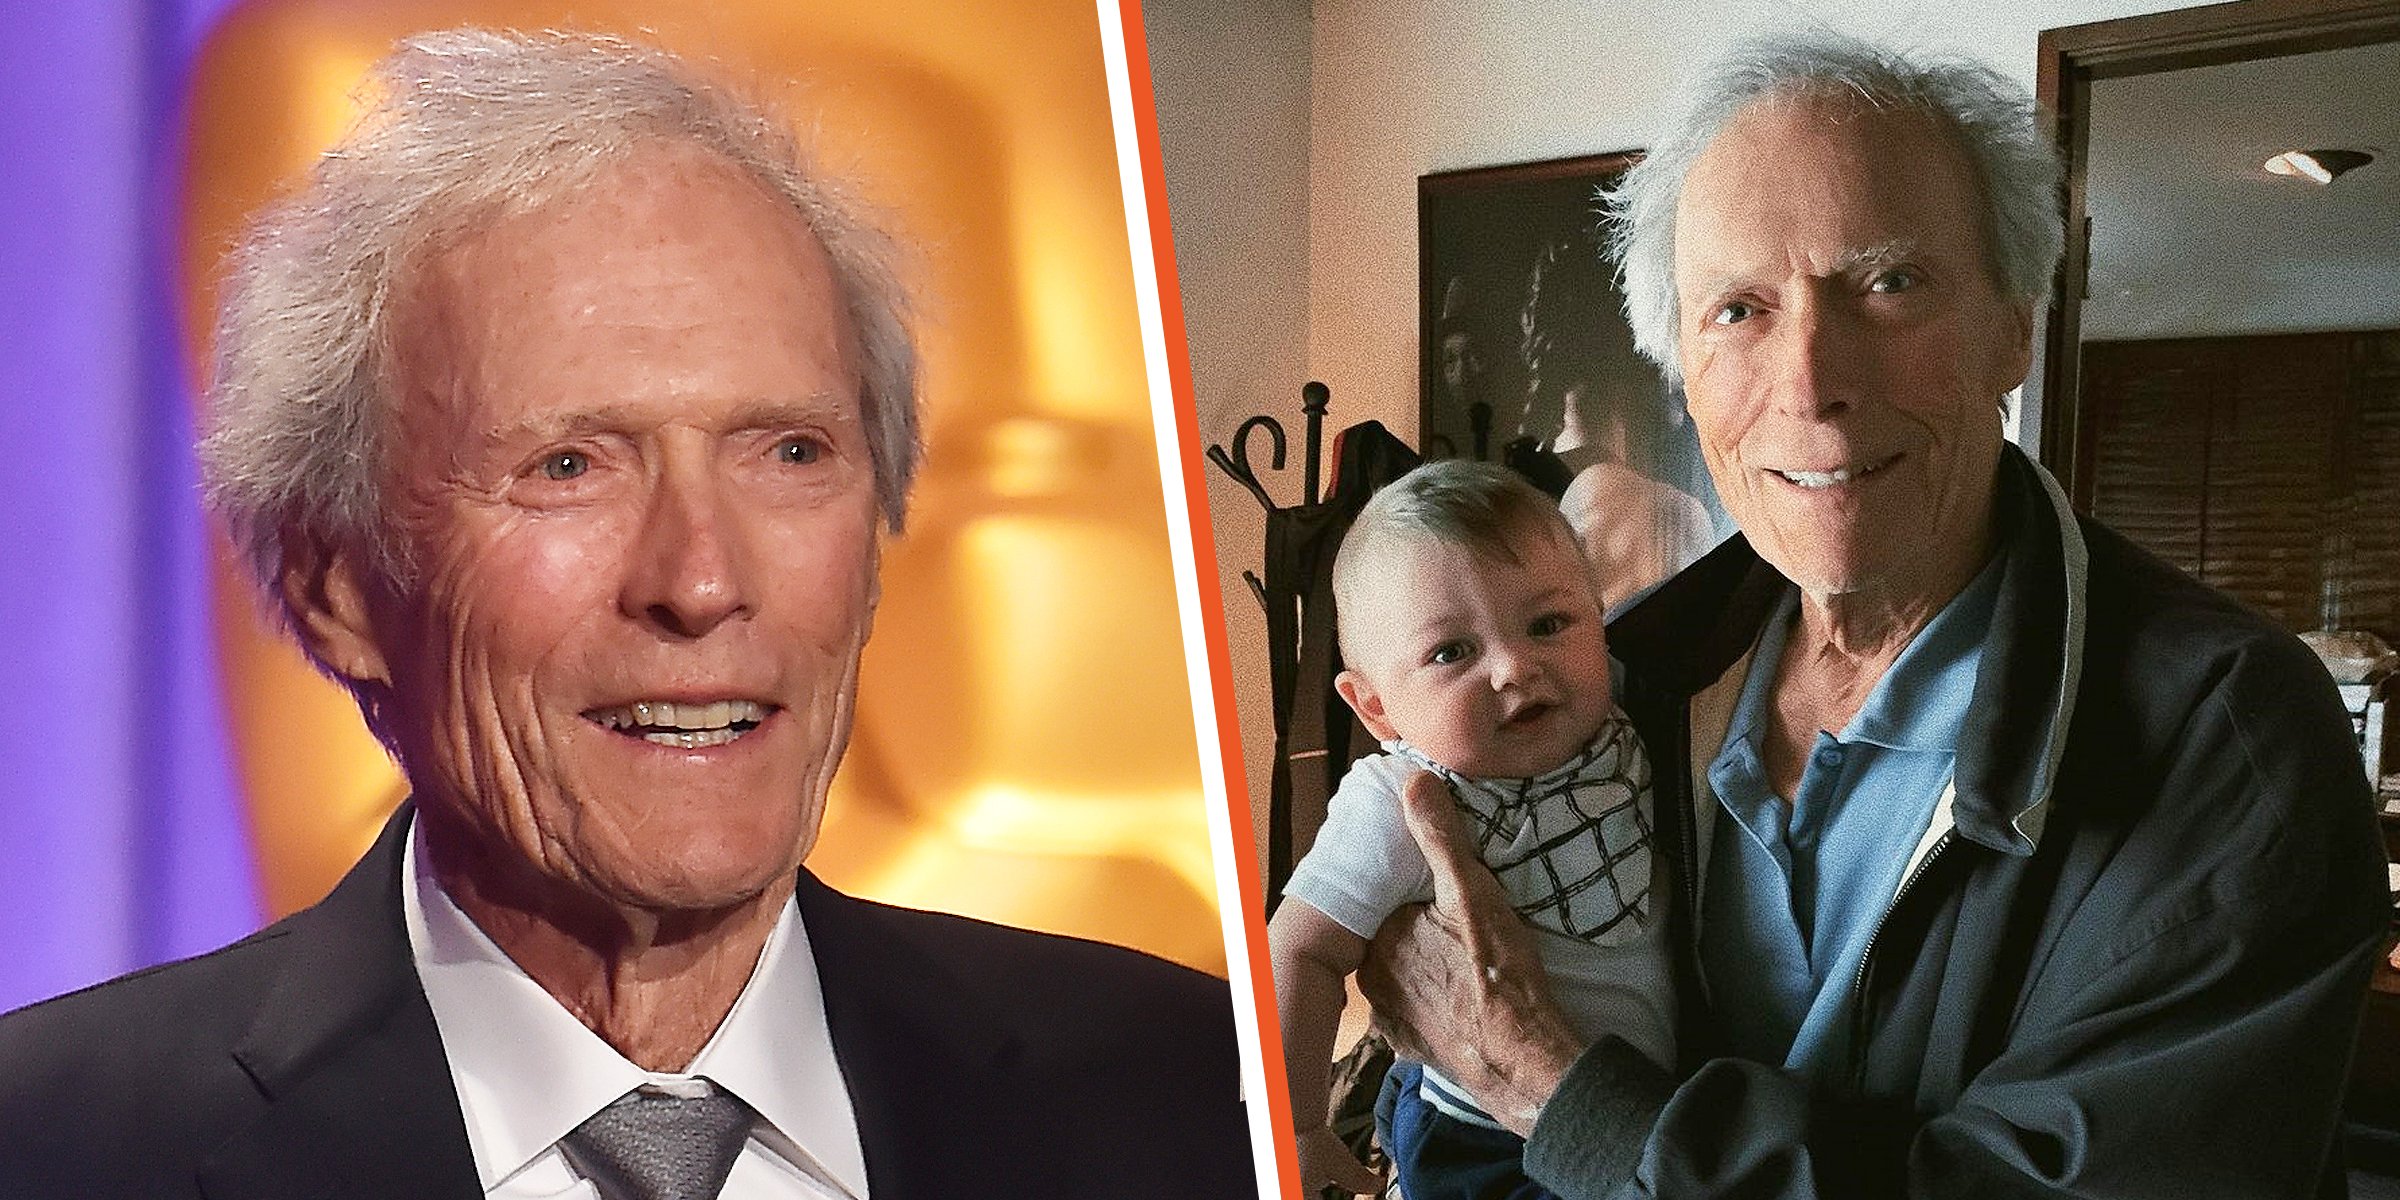 Clint Eastwood | Clint Eastwood with his grandson, Titan | Source: Getty Images | Instagram.com/francescaeastwood